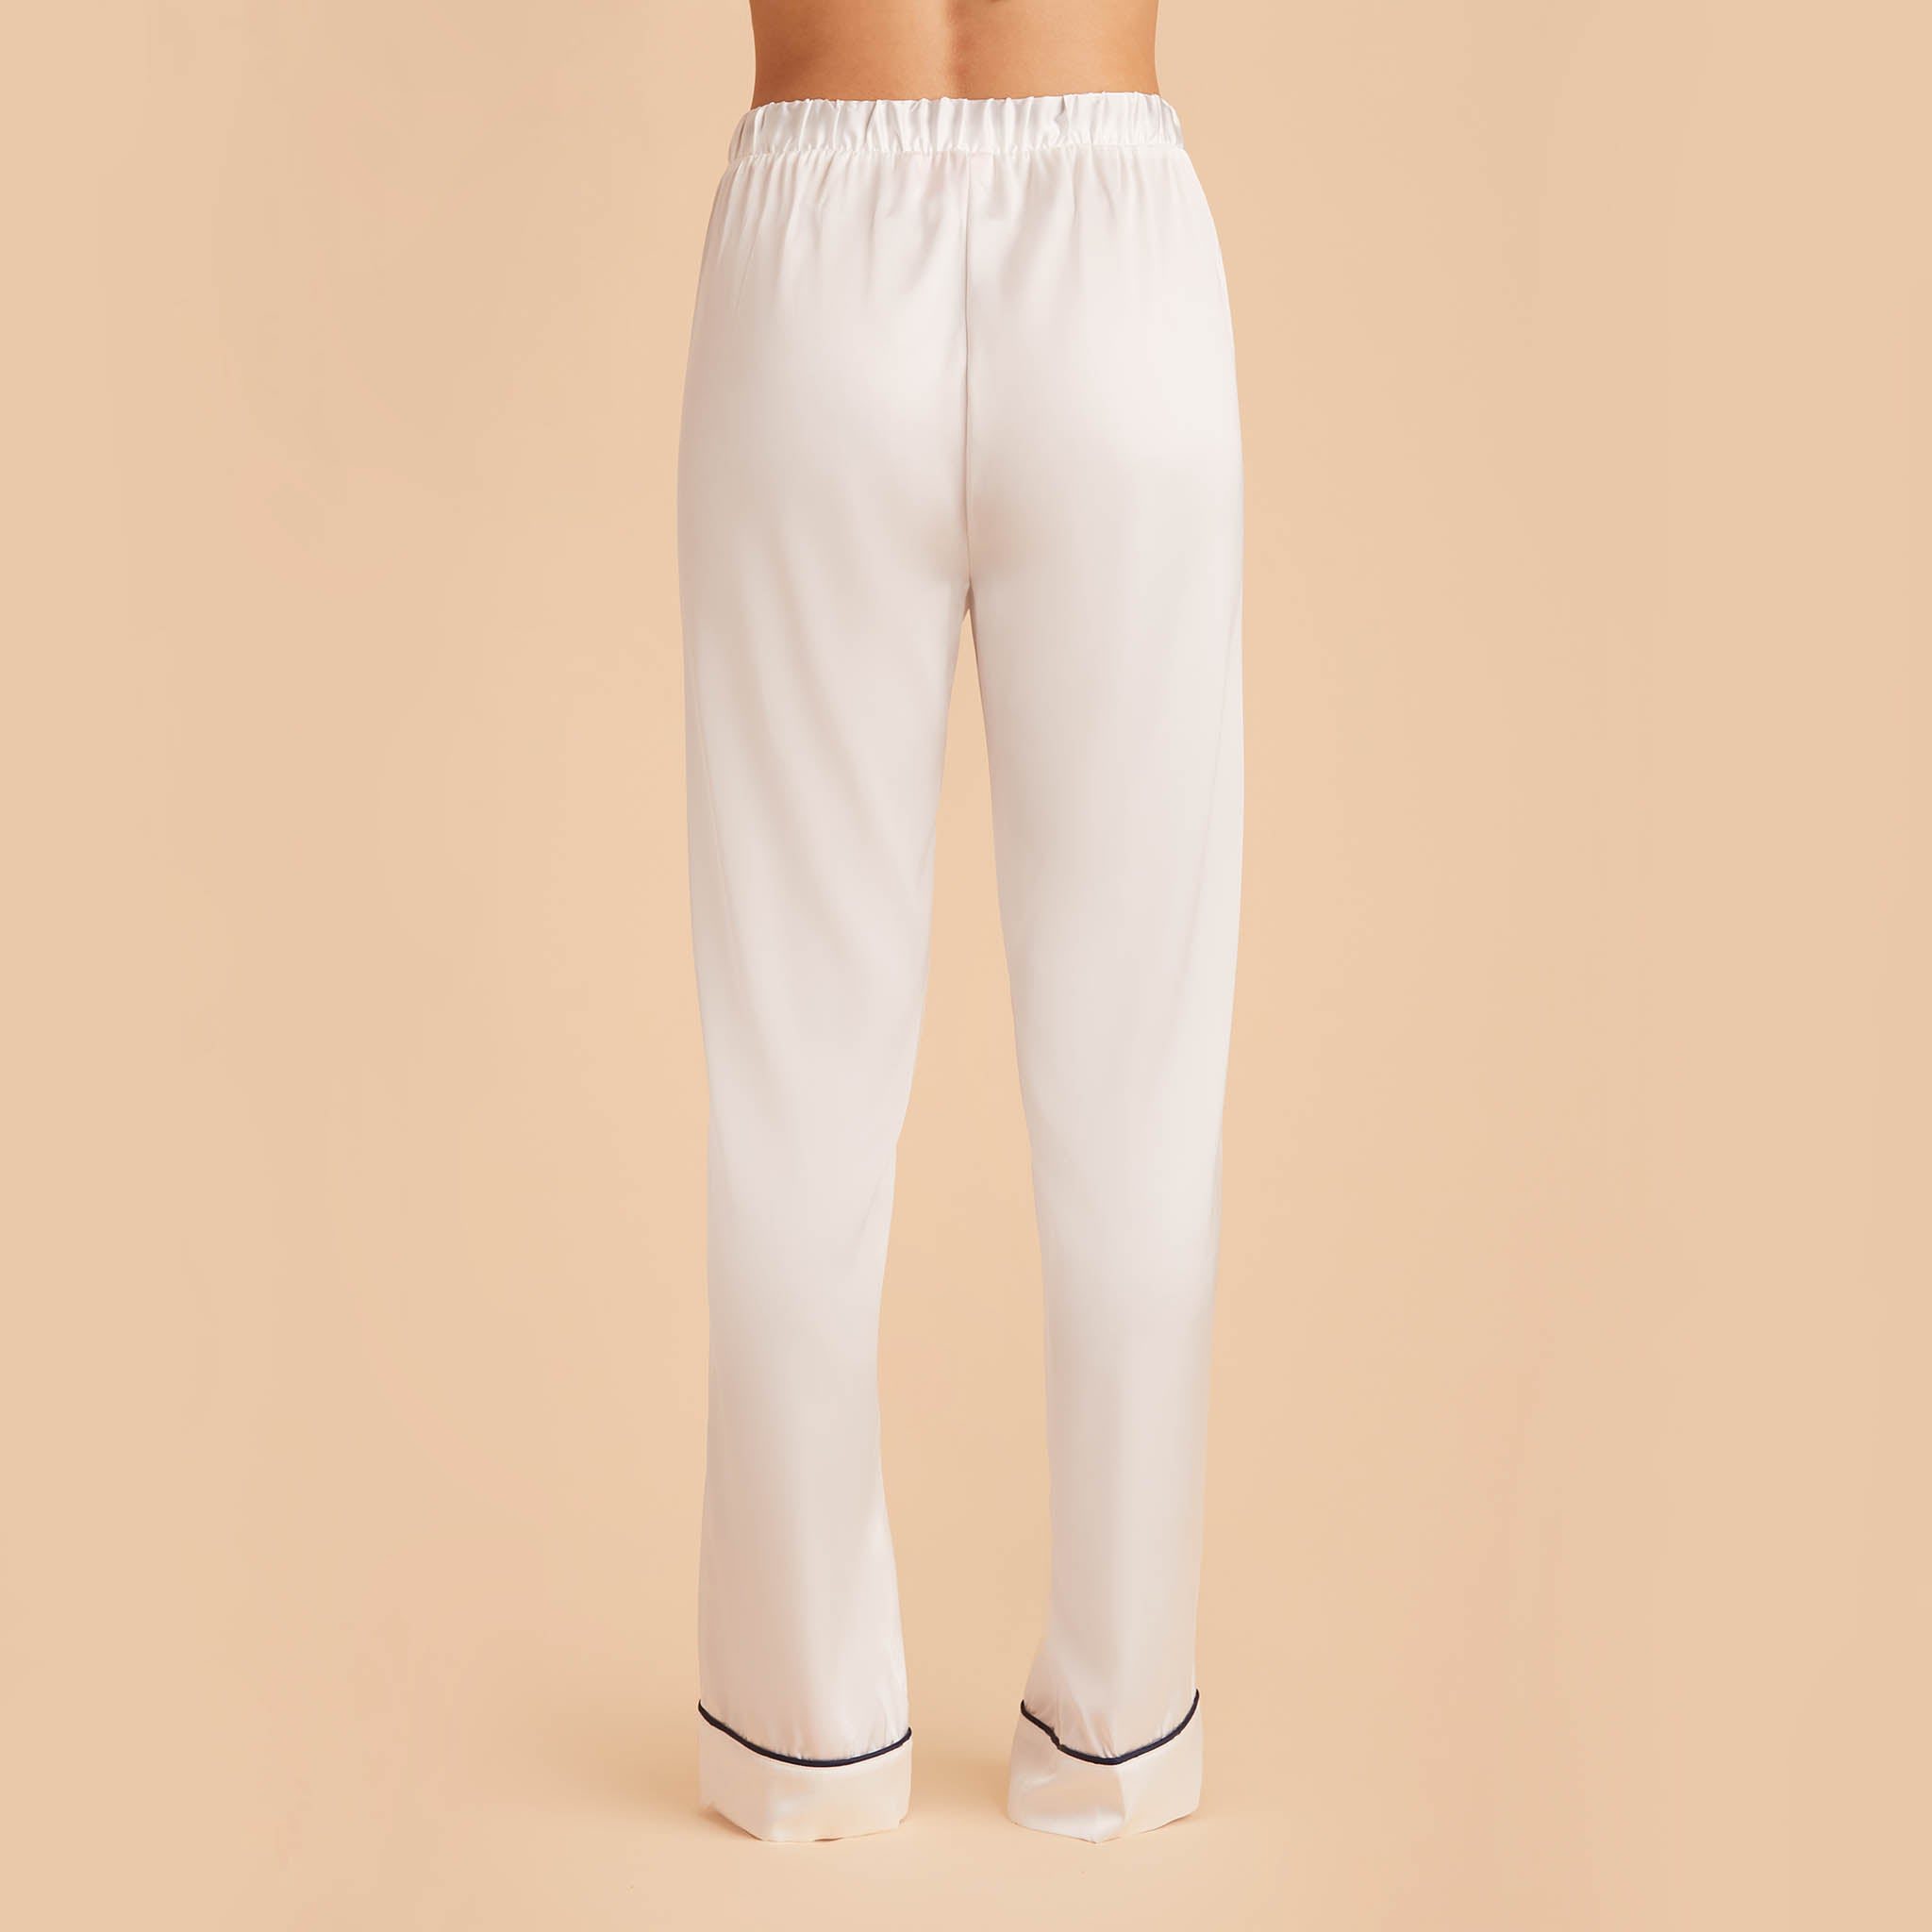 Jonny Satin Pants Bridesmaid Pajamas With White Piping in ivory, back view